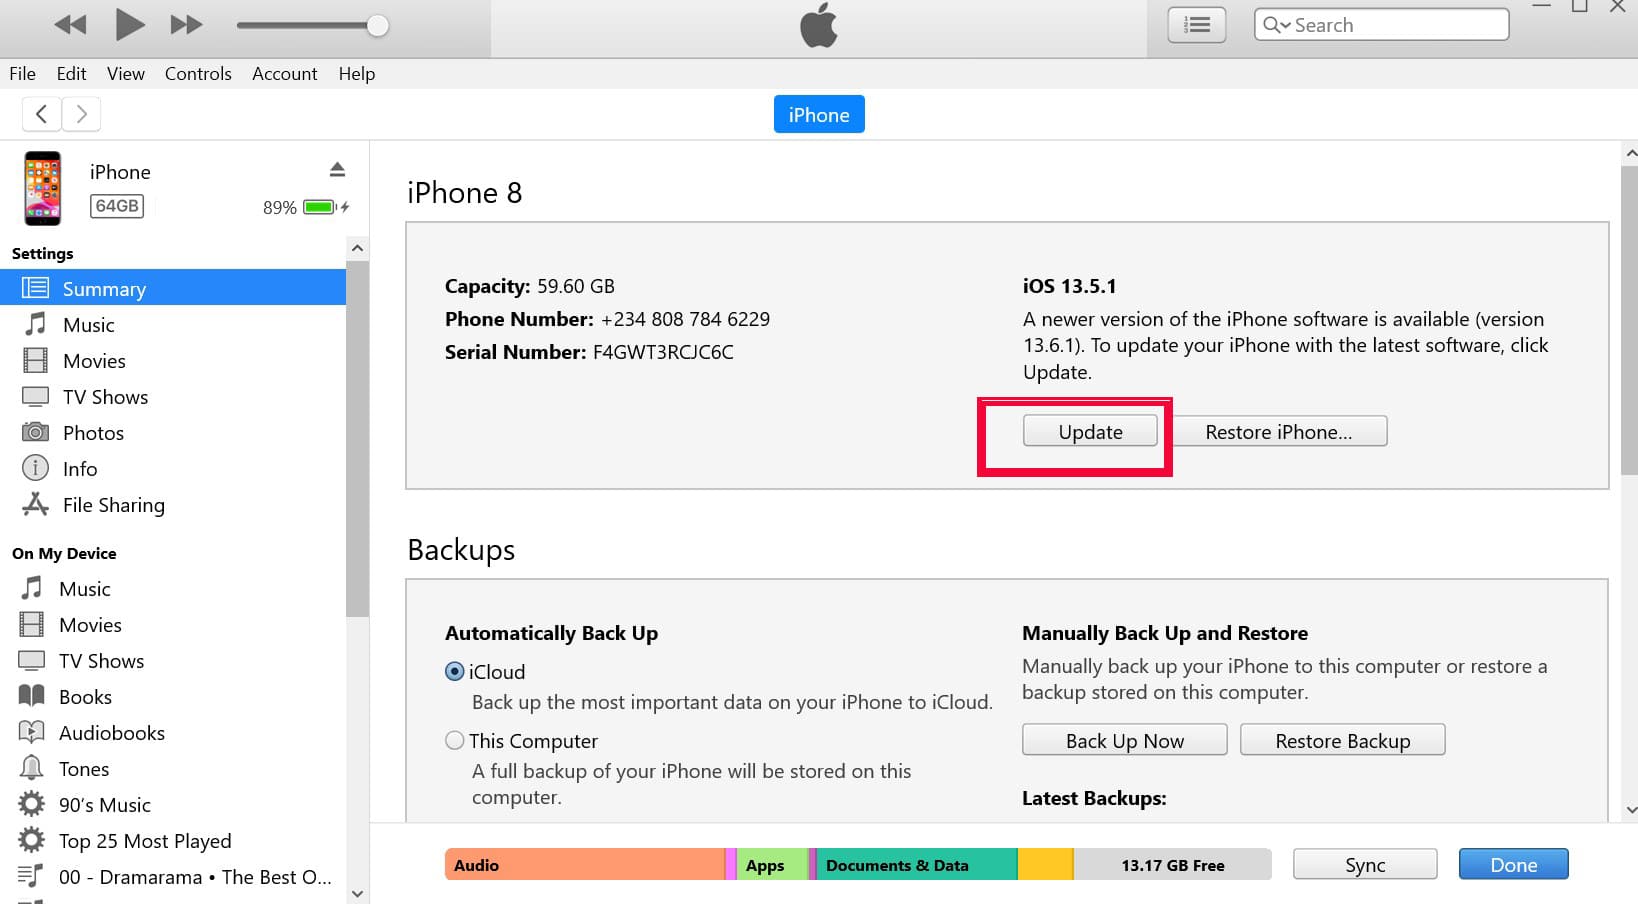 Keep ios up to date using iTunes